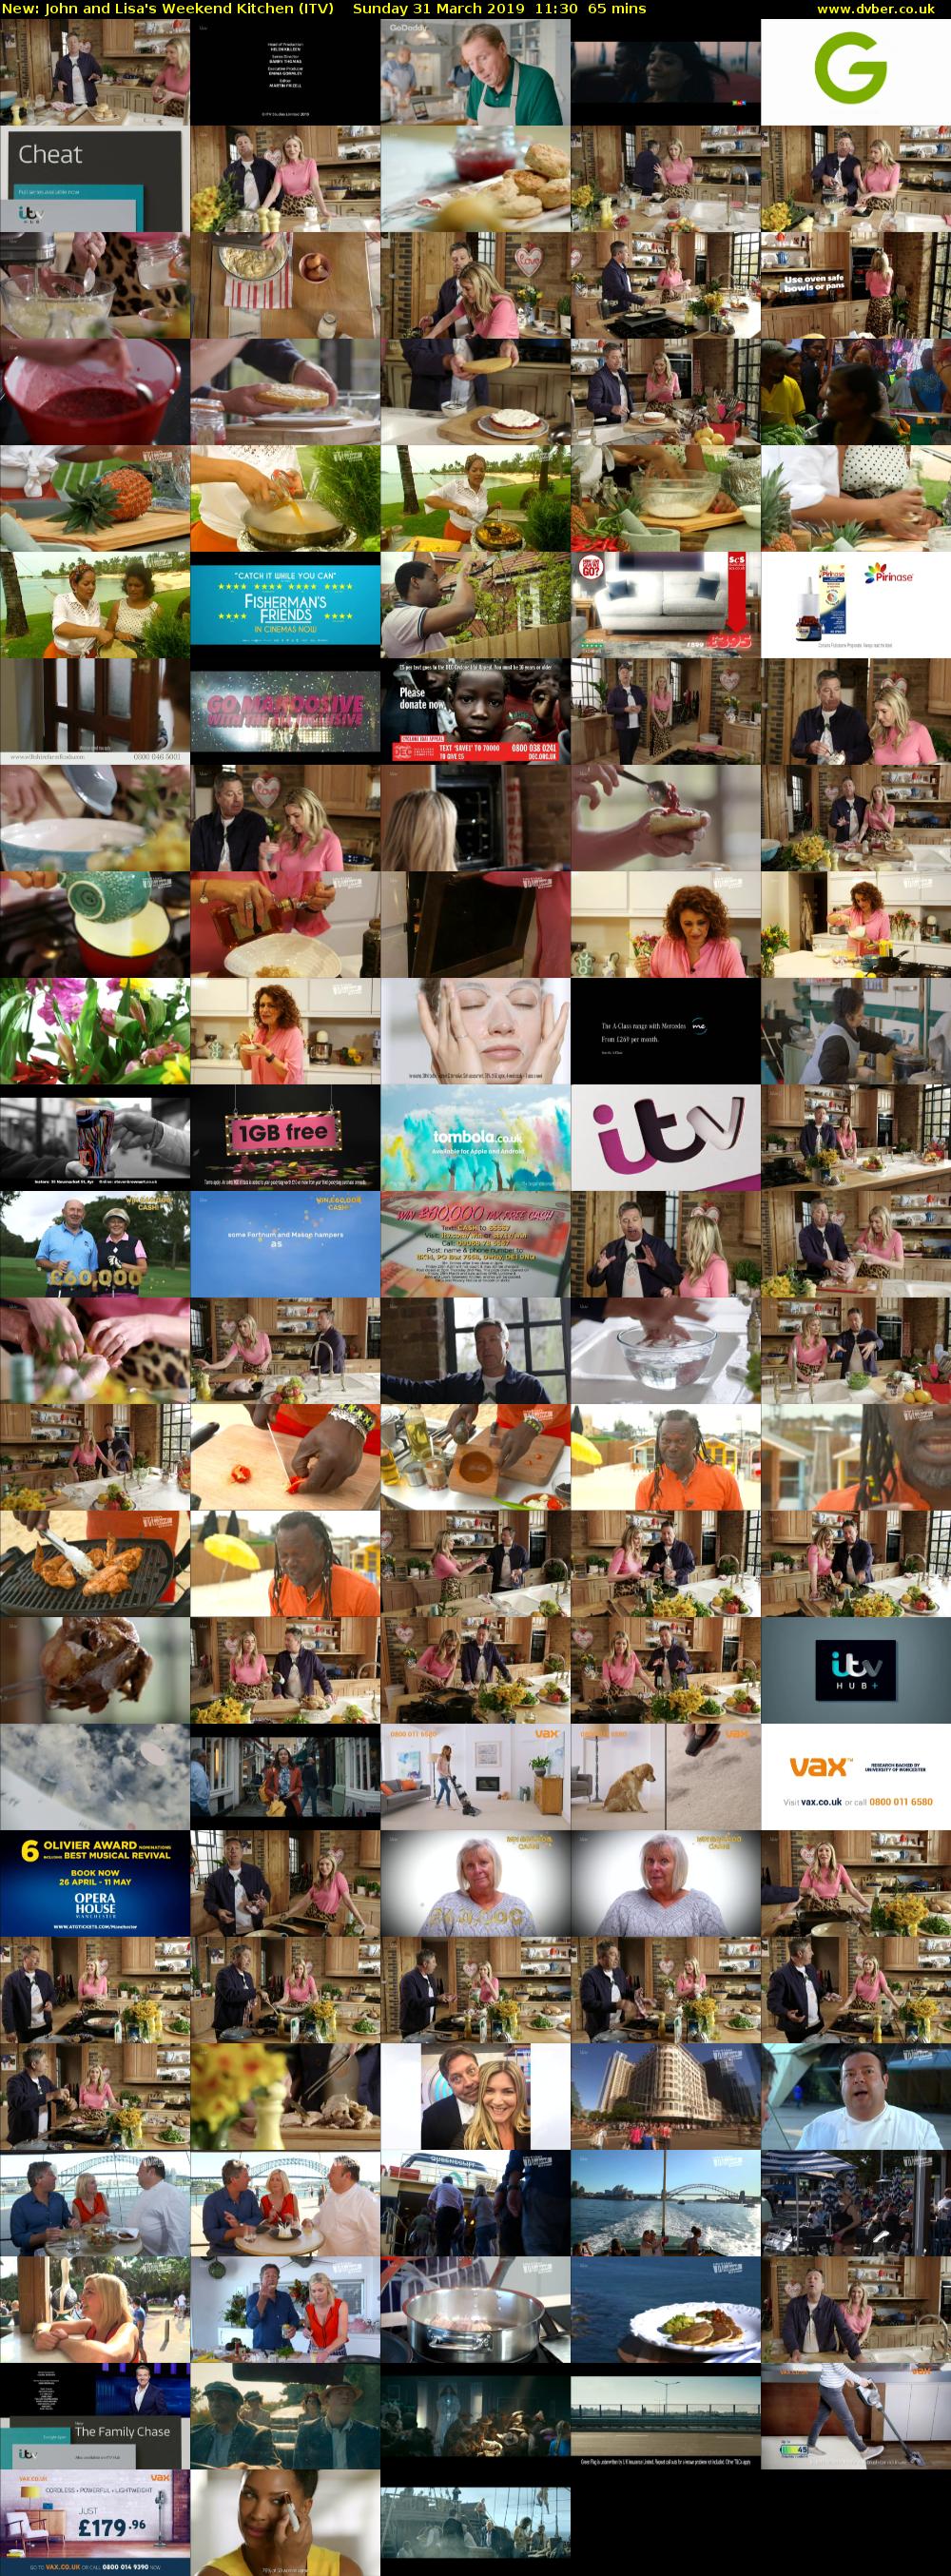 John and Lisa's Weekend Kitchen (ITV) Sunday 31 March 2019 11:30 - 12:35